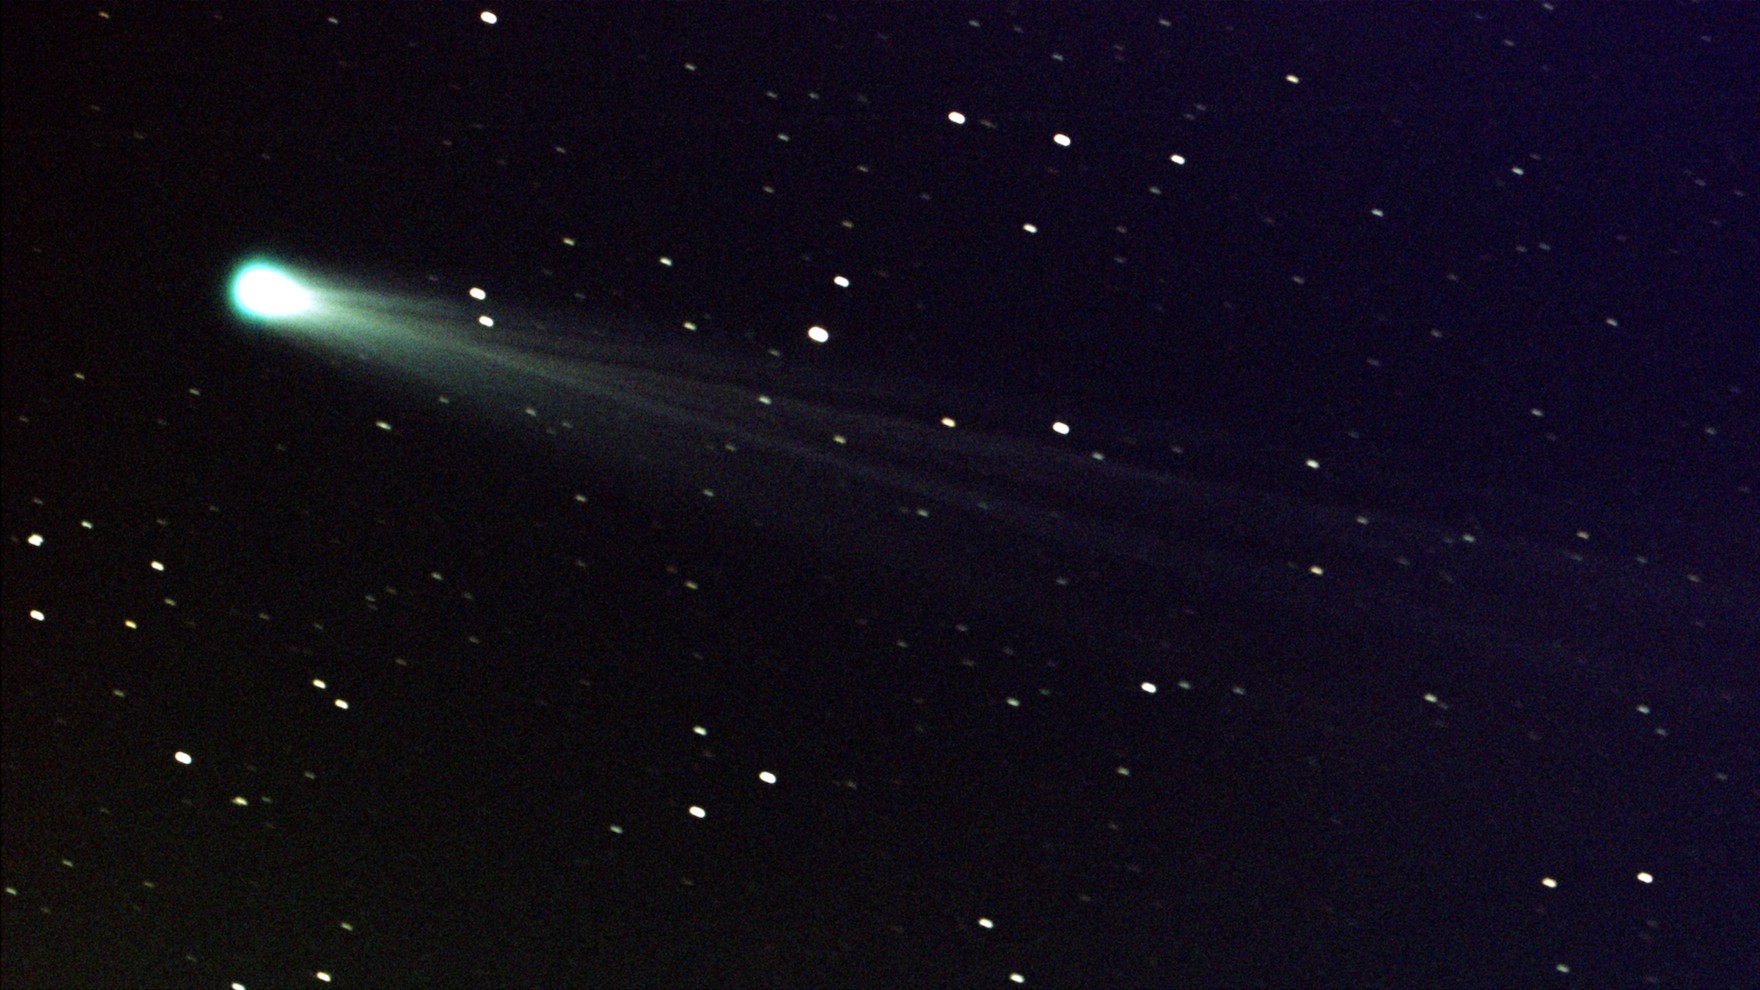 Bright new comet discovered zooming toward the sun could outshine the